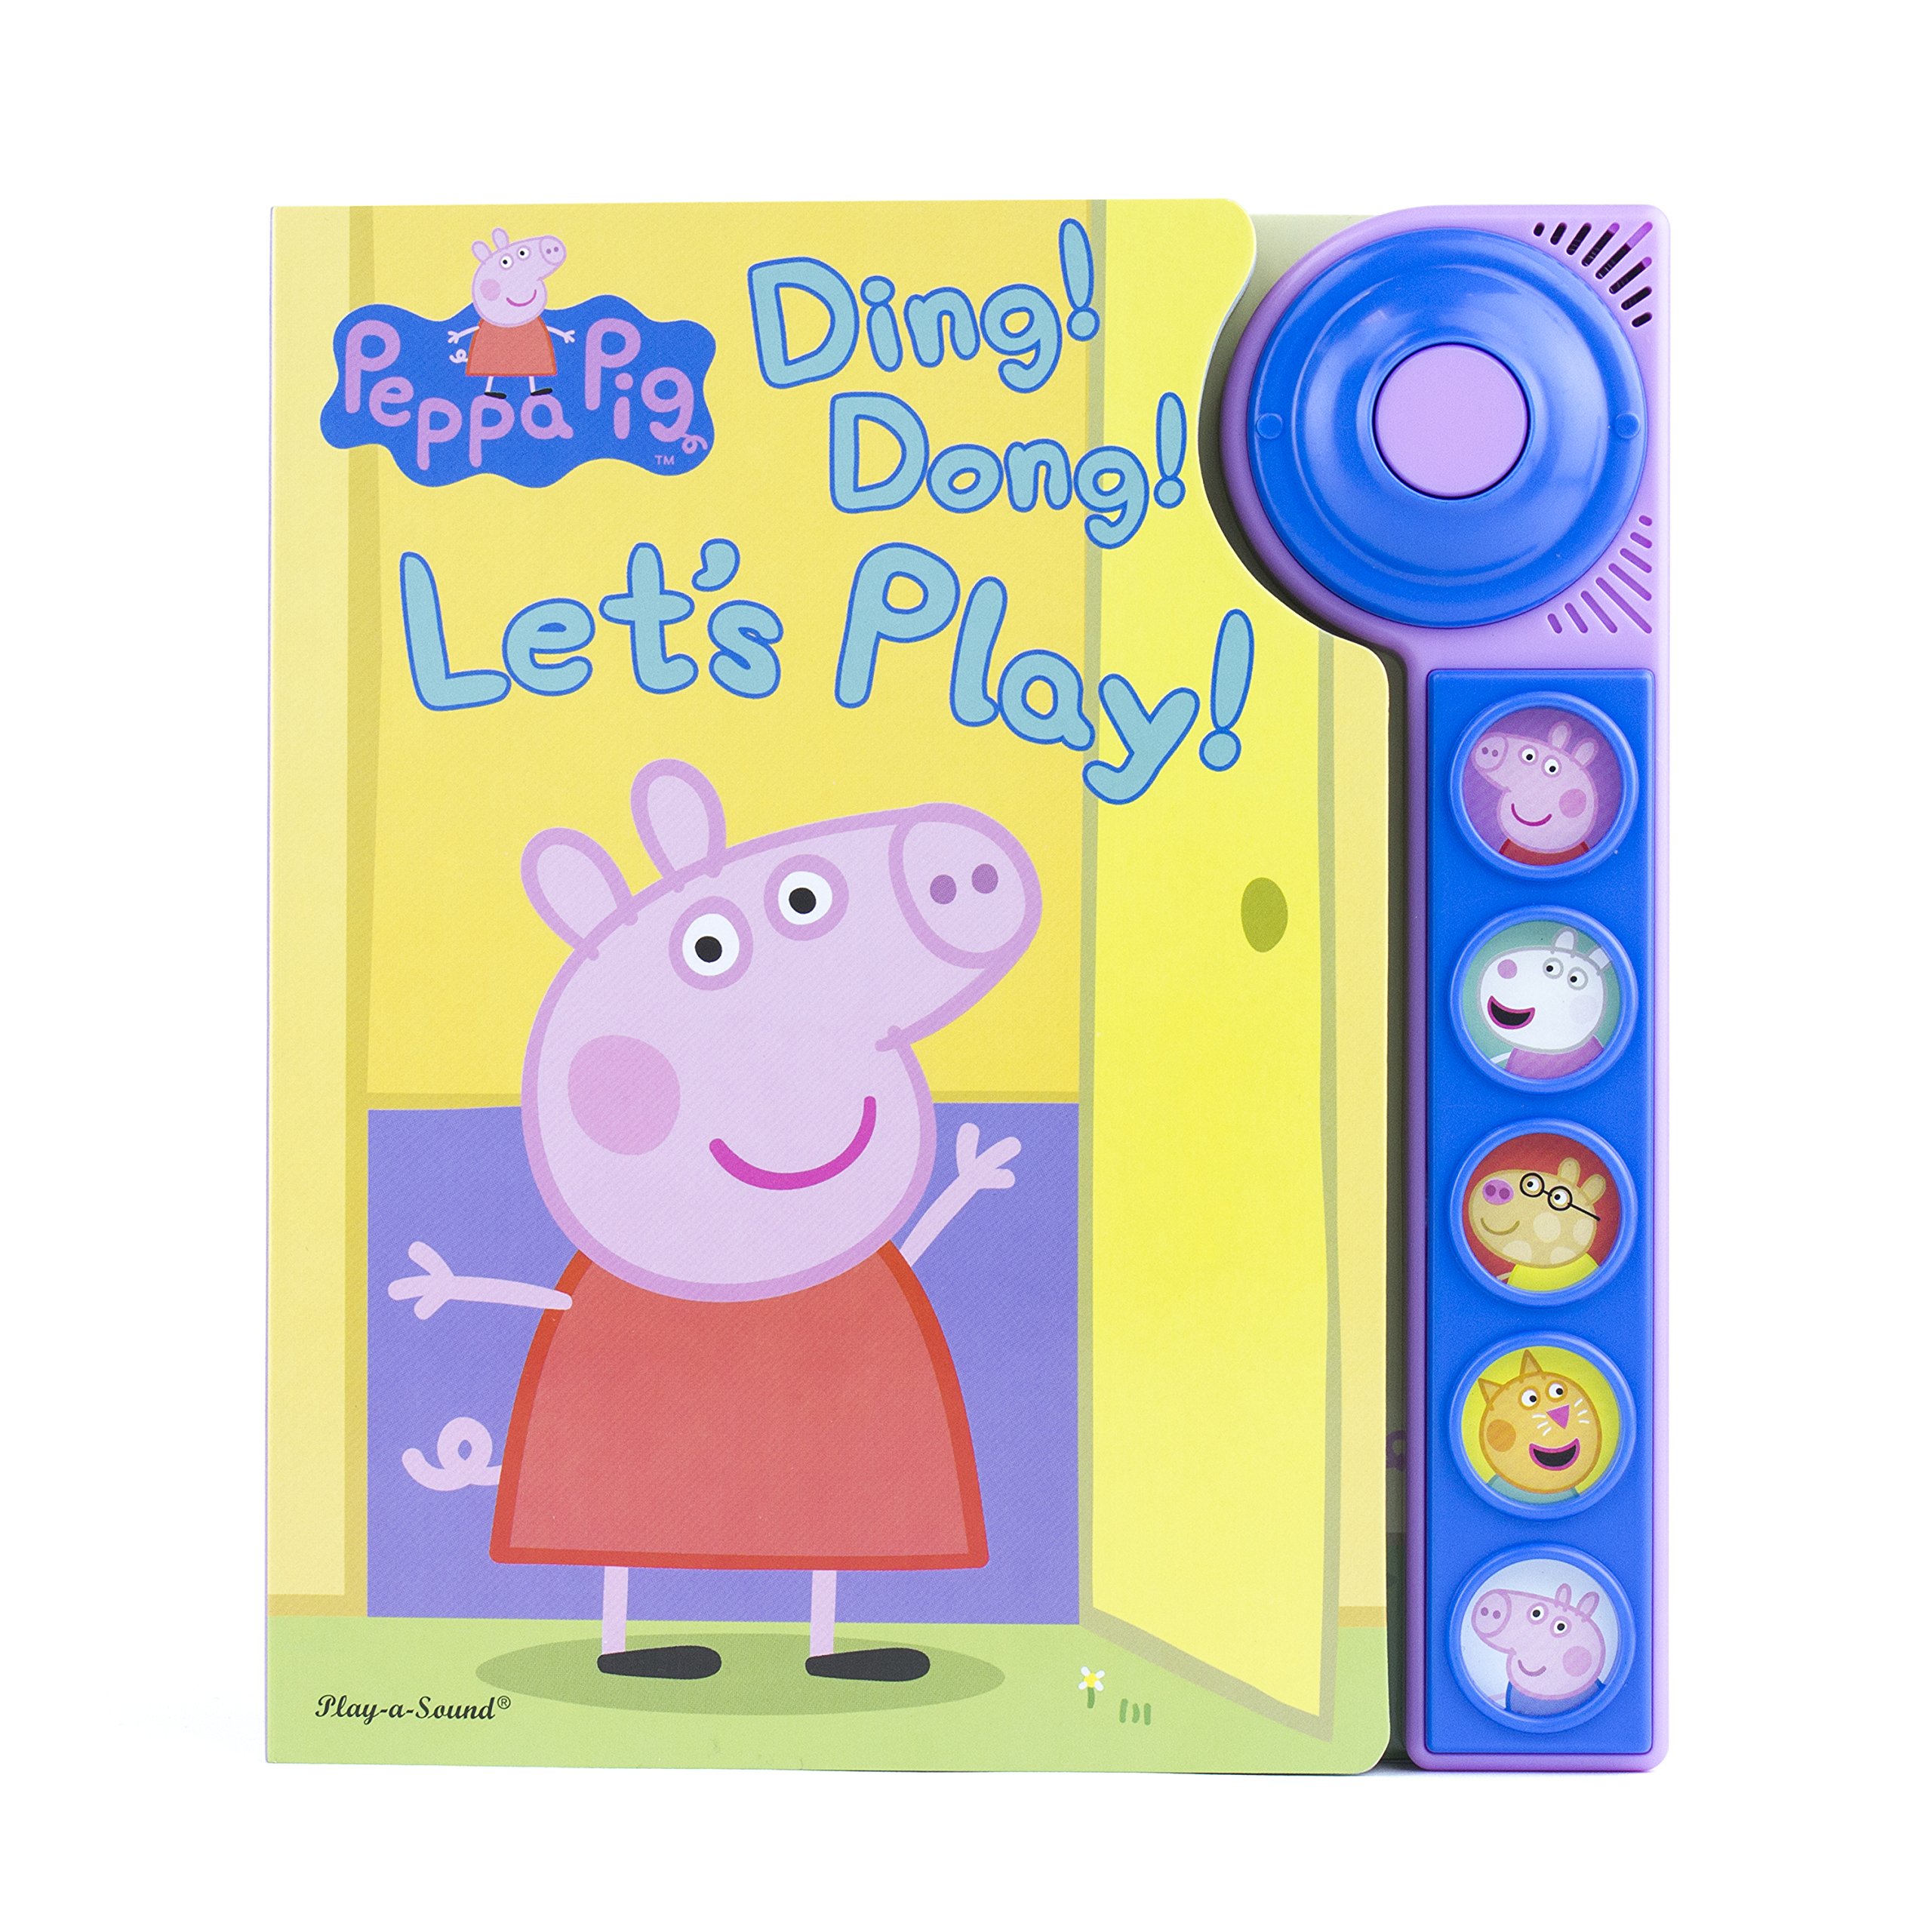 Peppa Pig - Ding! Dong! Let's Play! Doorbell Sound Book - PI Kids (Play-A-Sound)